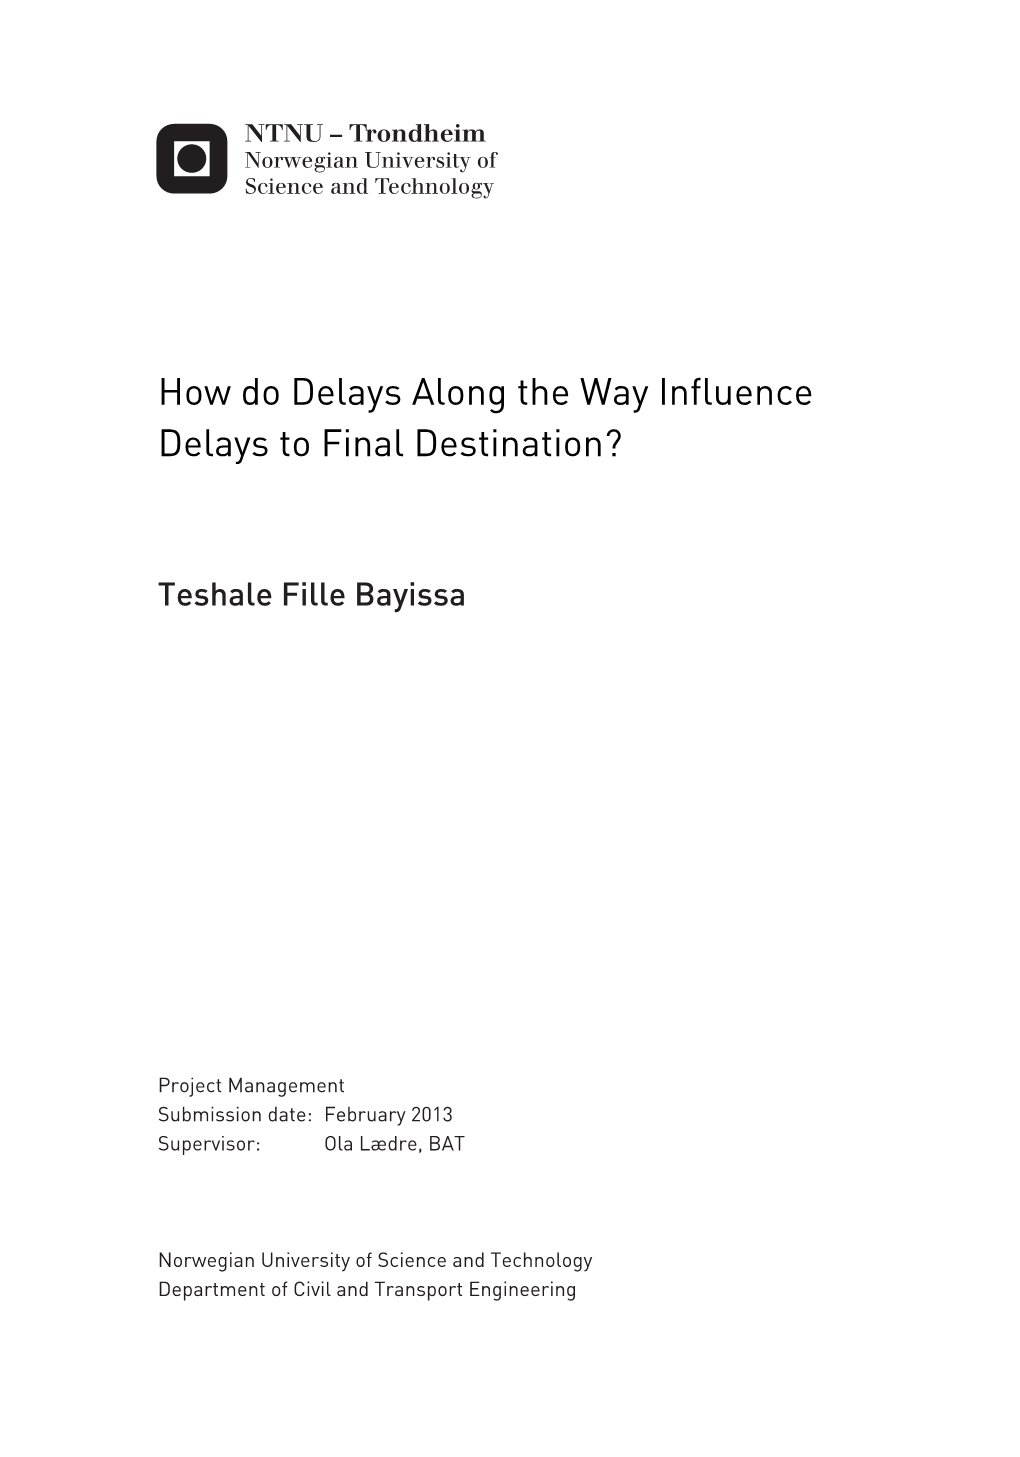 How Do Delays Along the Way Influence Delays to Final Destination?